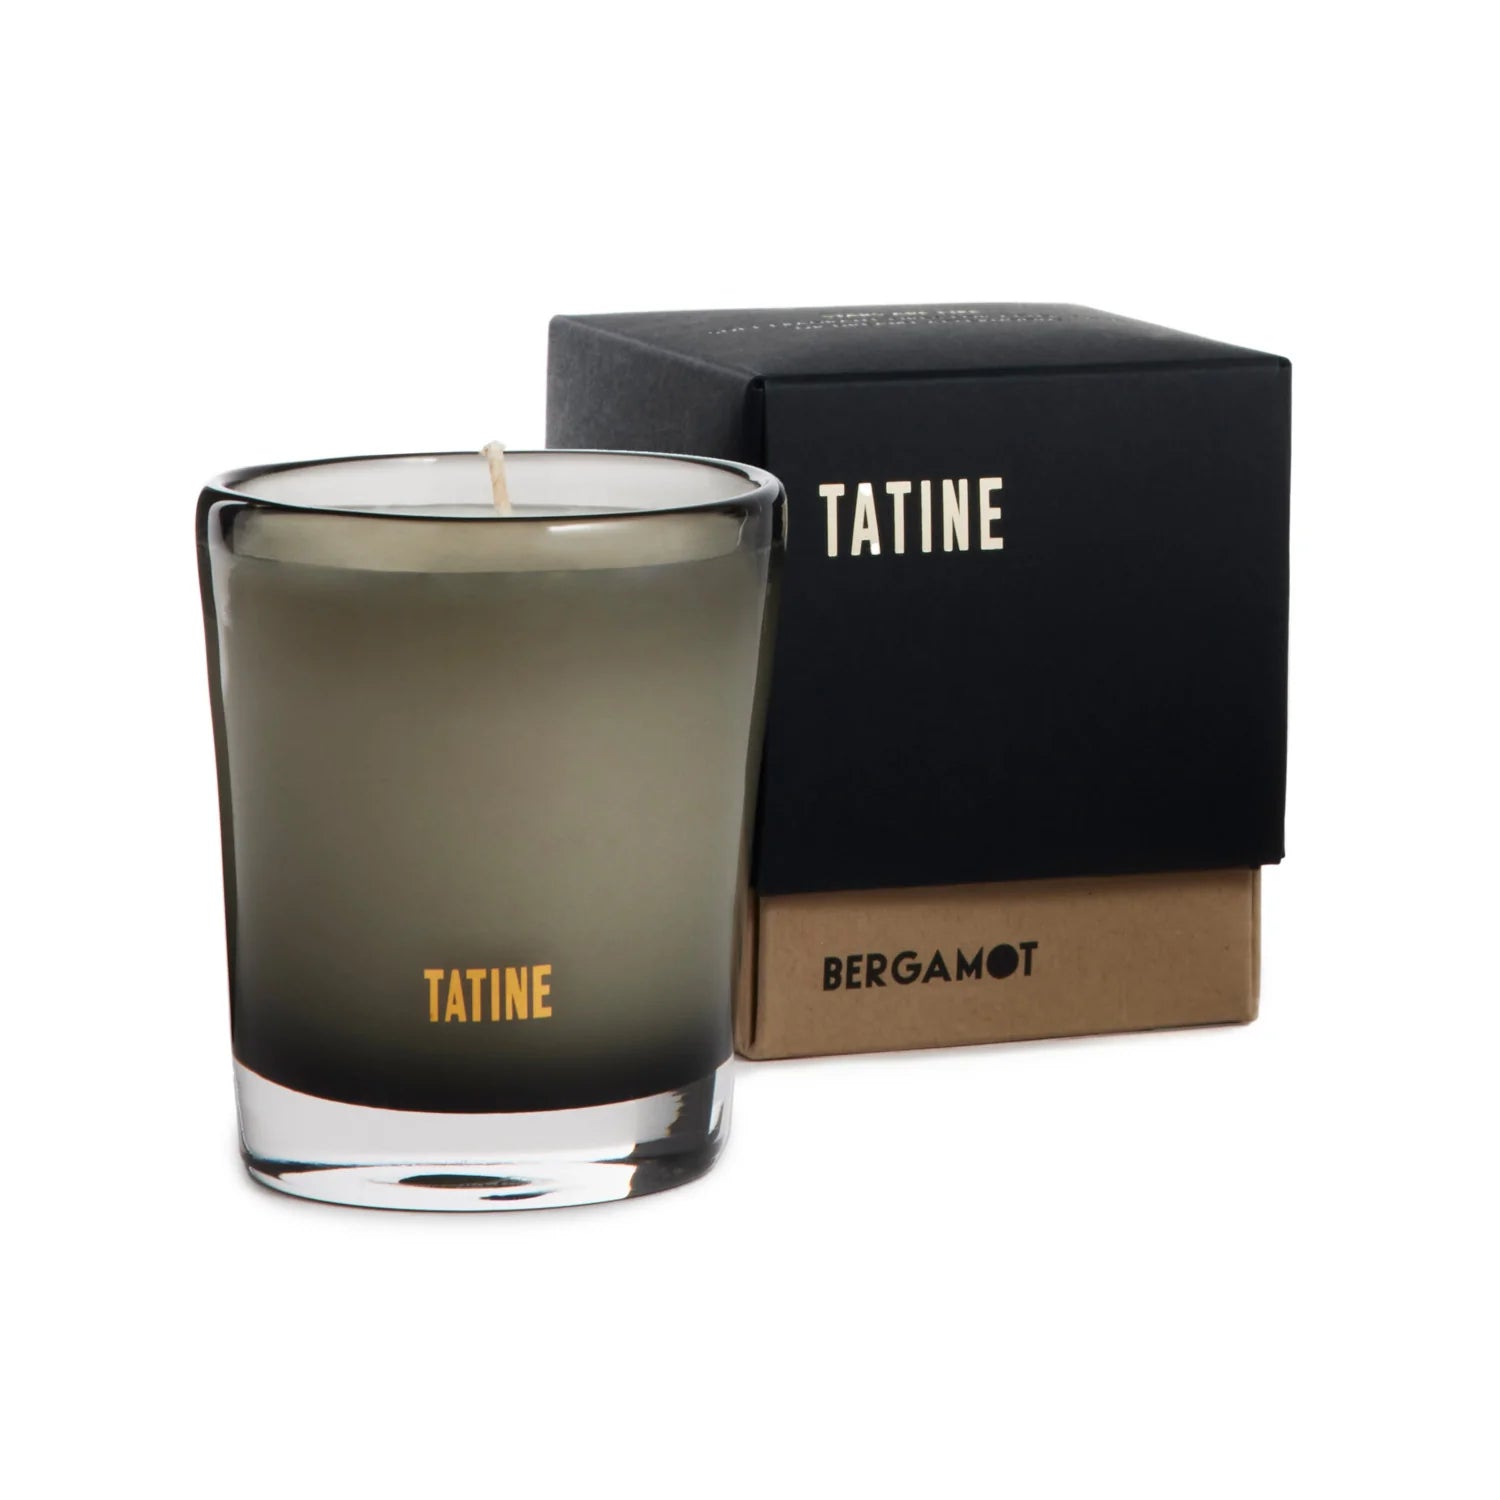 tatine, bergamot candle, home fragrance, smoke grey glass vessel, natural and vegetable-based wax, high-quality ingredients, ethically made, curate, shopthecurate